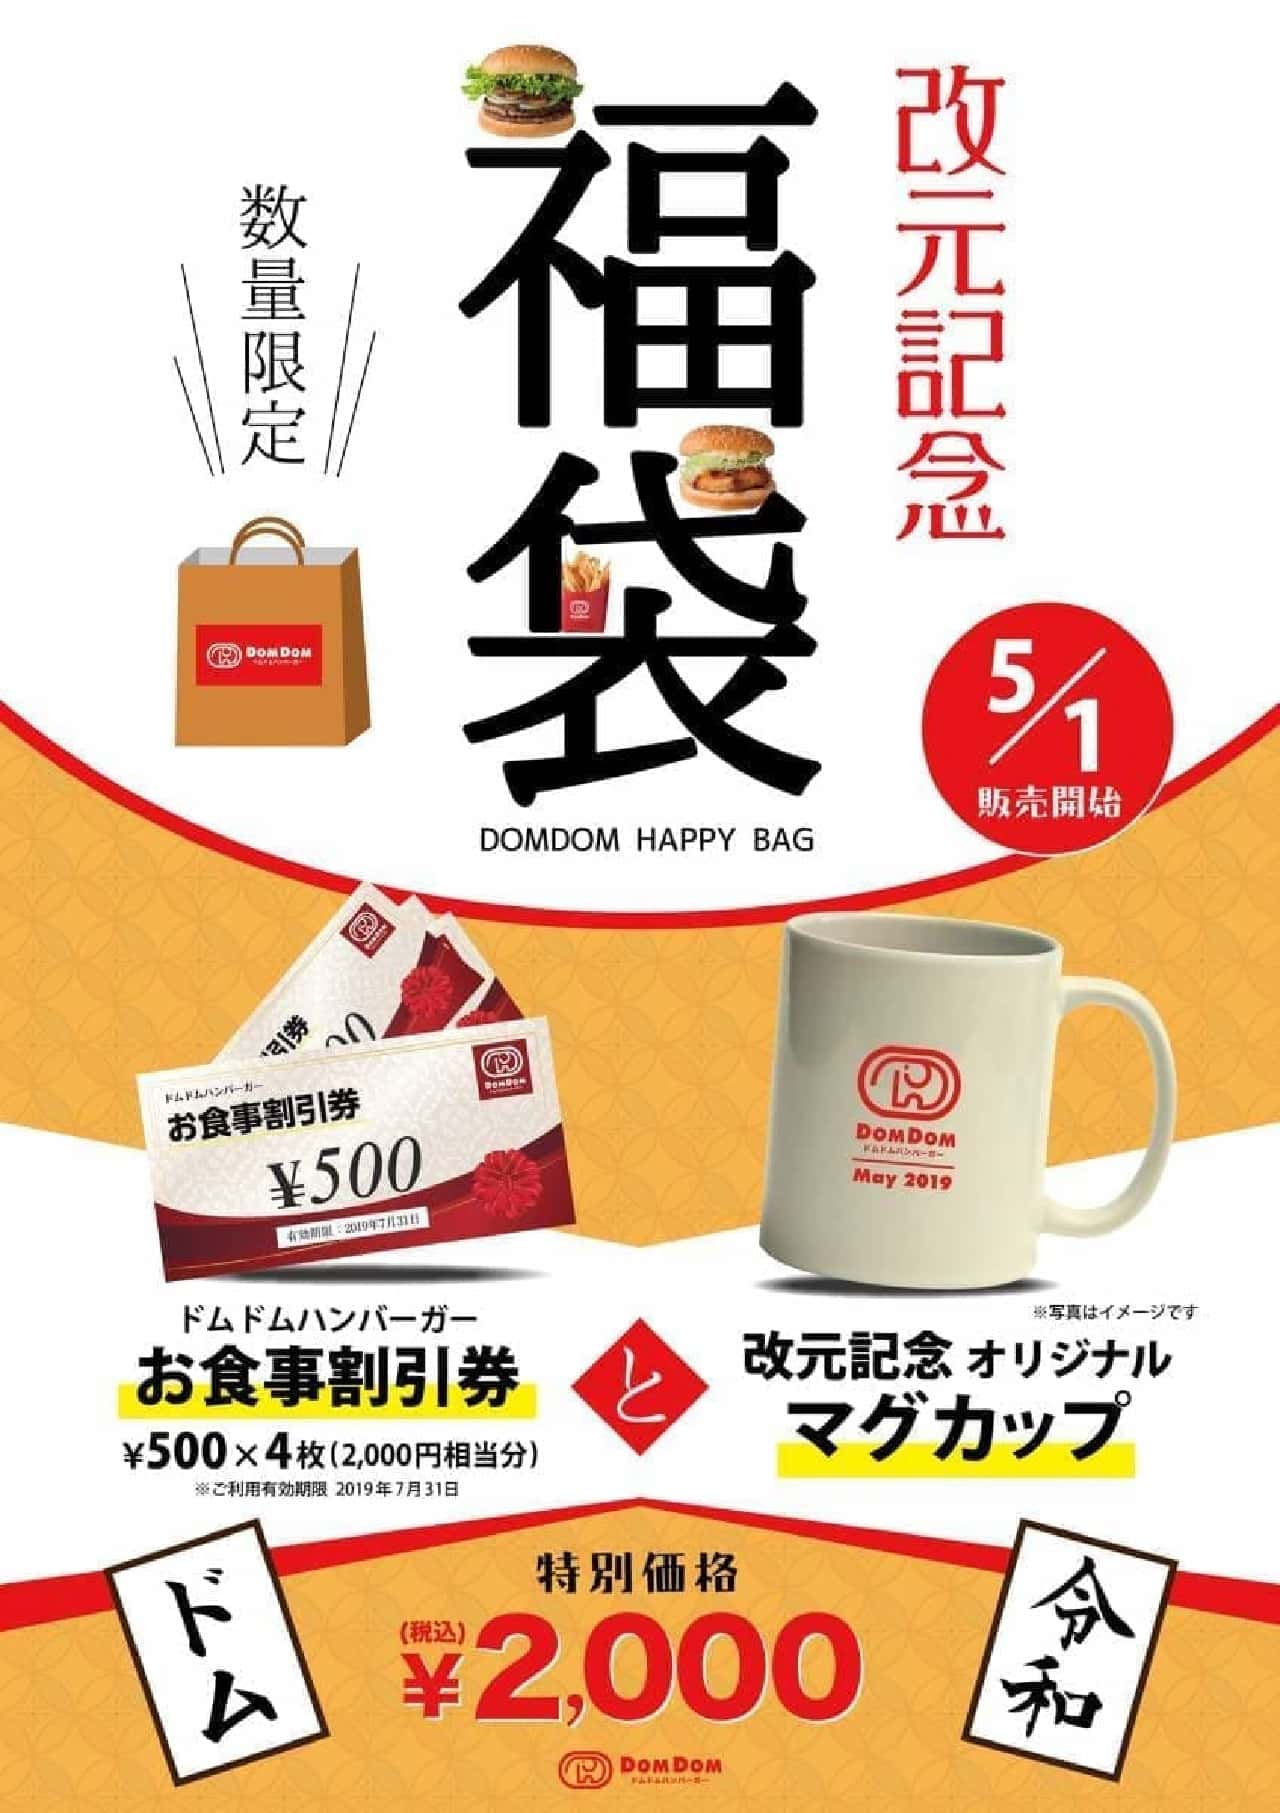 Dom Dom hamburger, "lucky bag" to commemorate the era of "Reiwa"